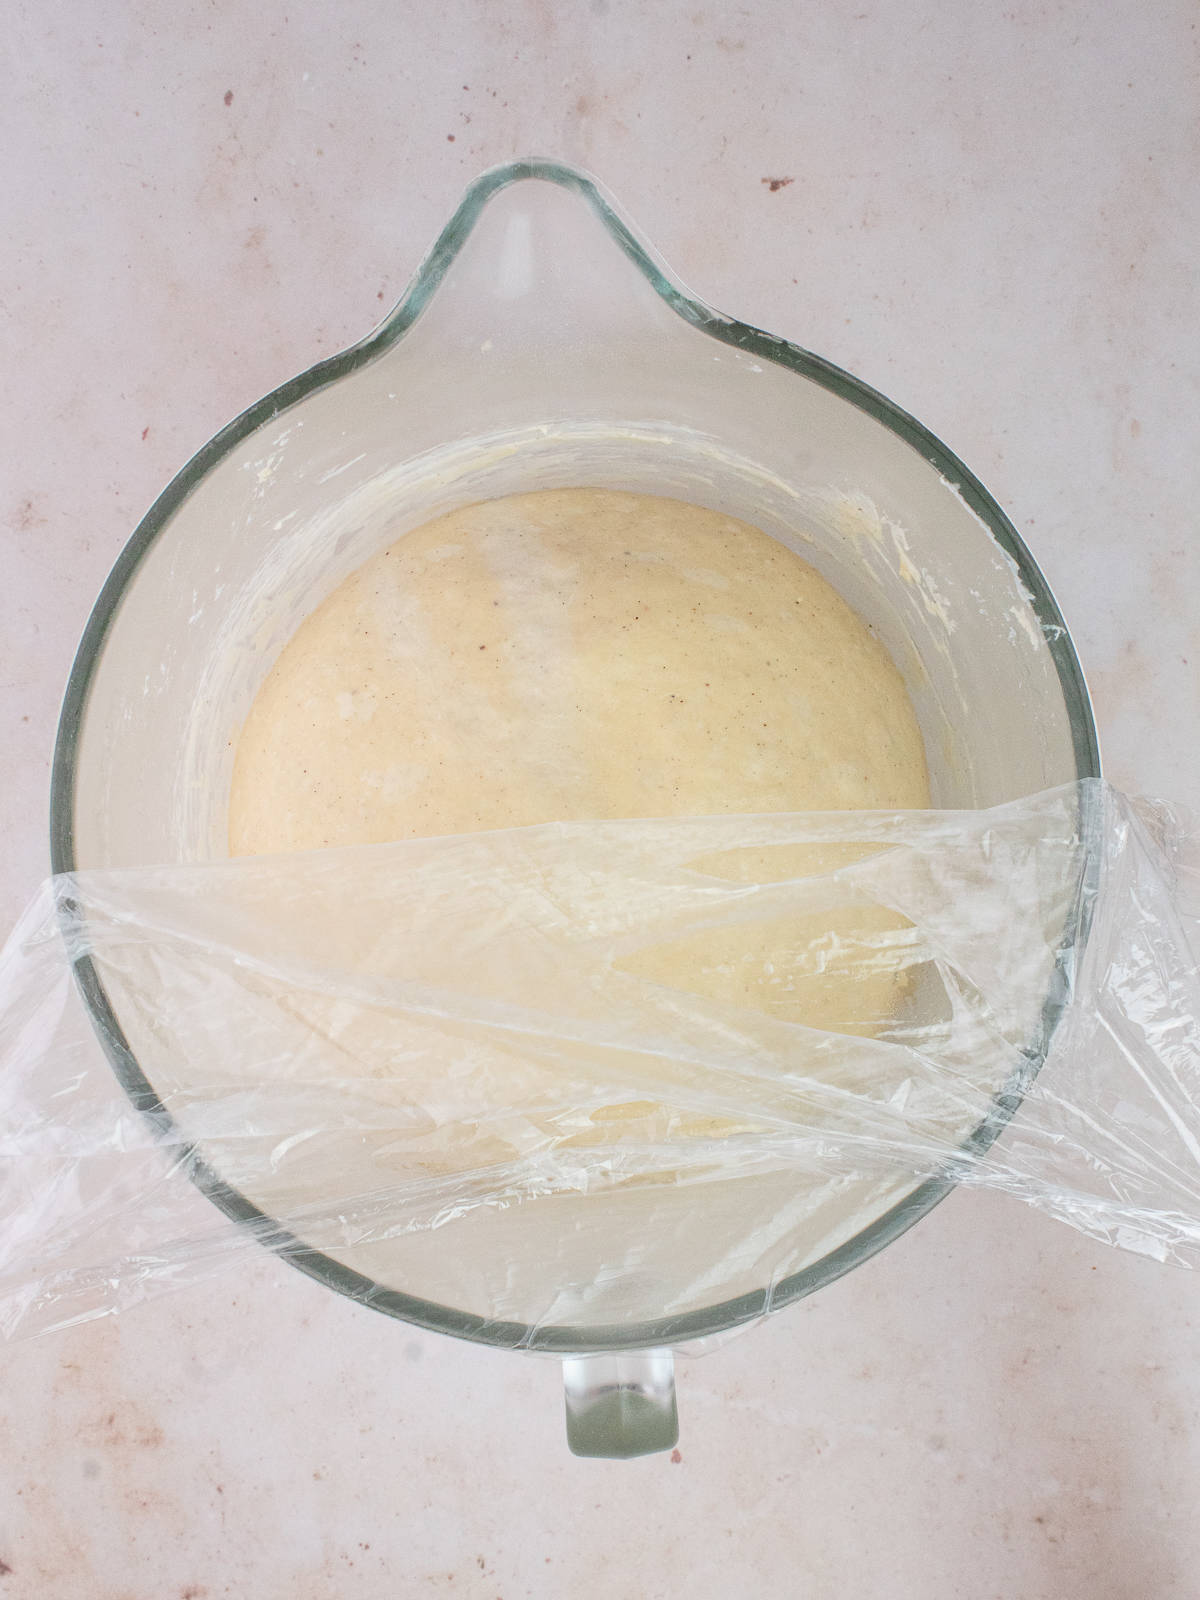 Proofed dough in glass bowl